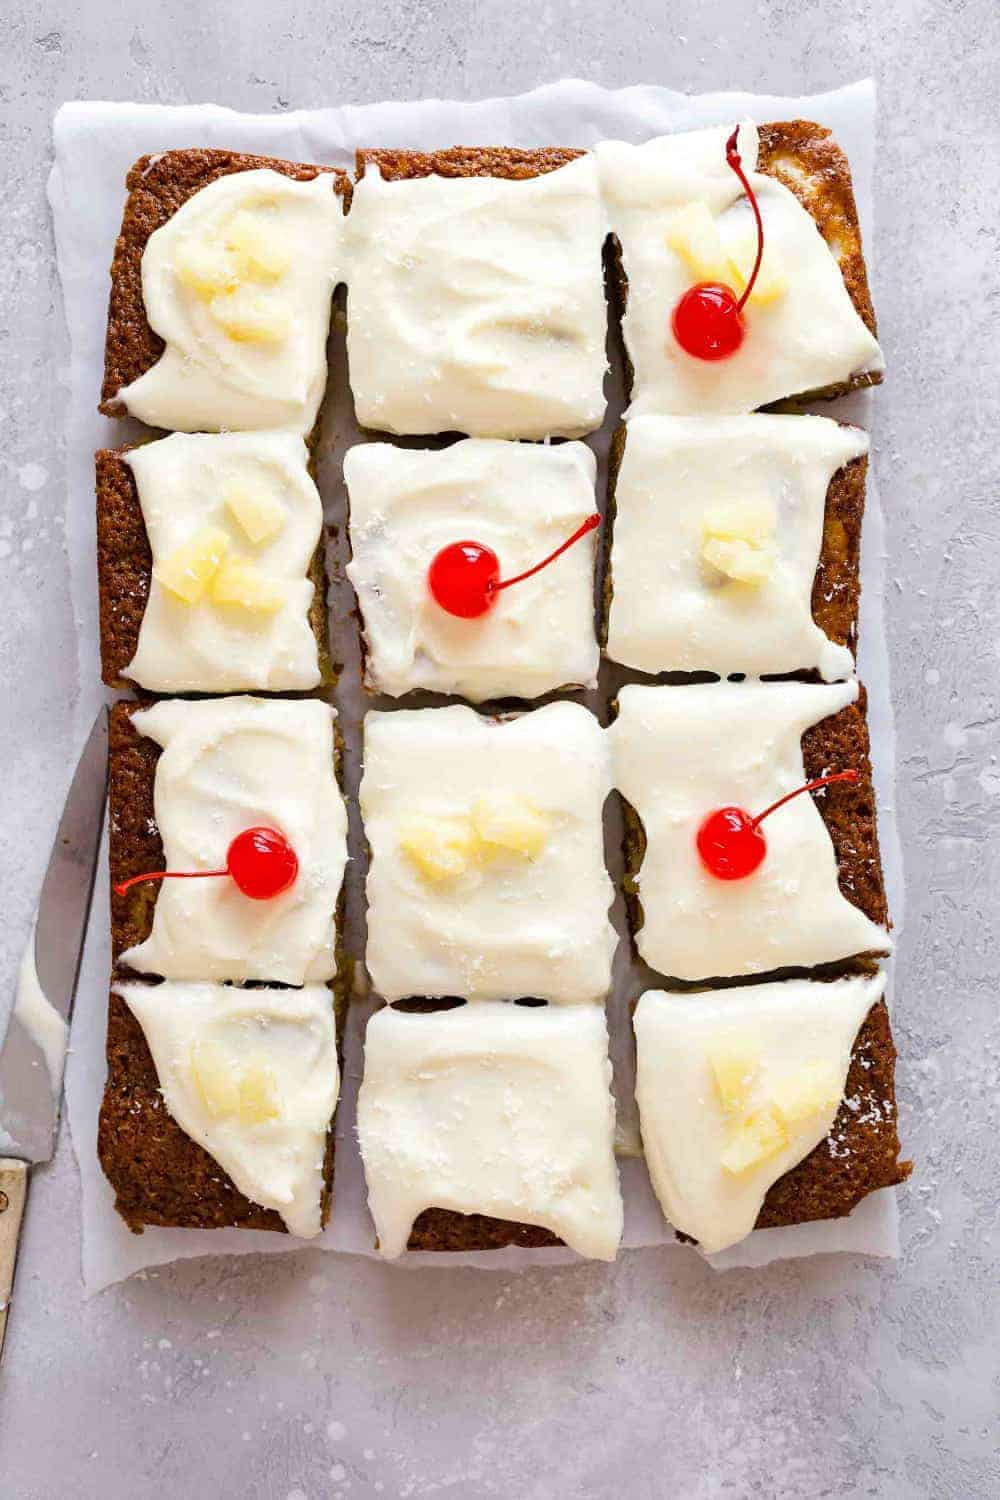 Pineapple cake topped with cream cheese frosting and cut into slices, topped with cherries and pineapple